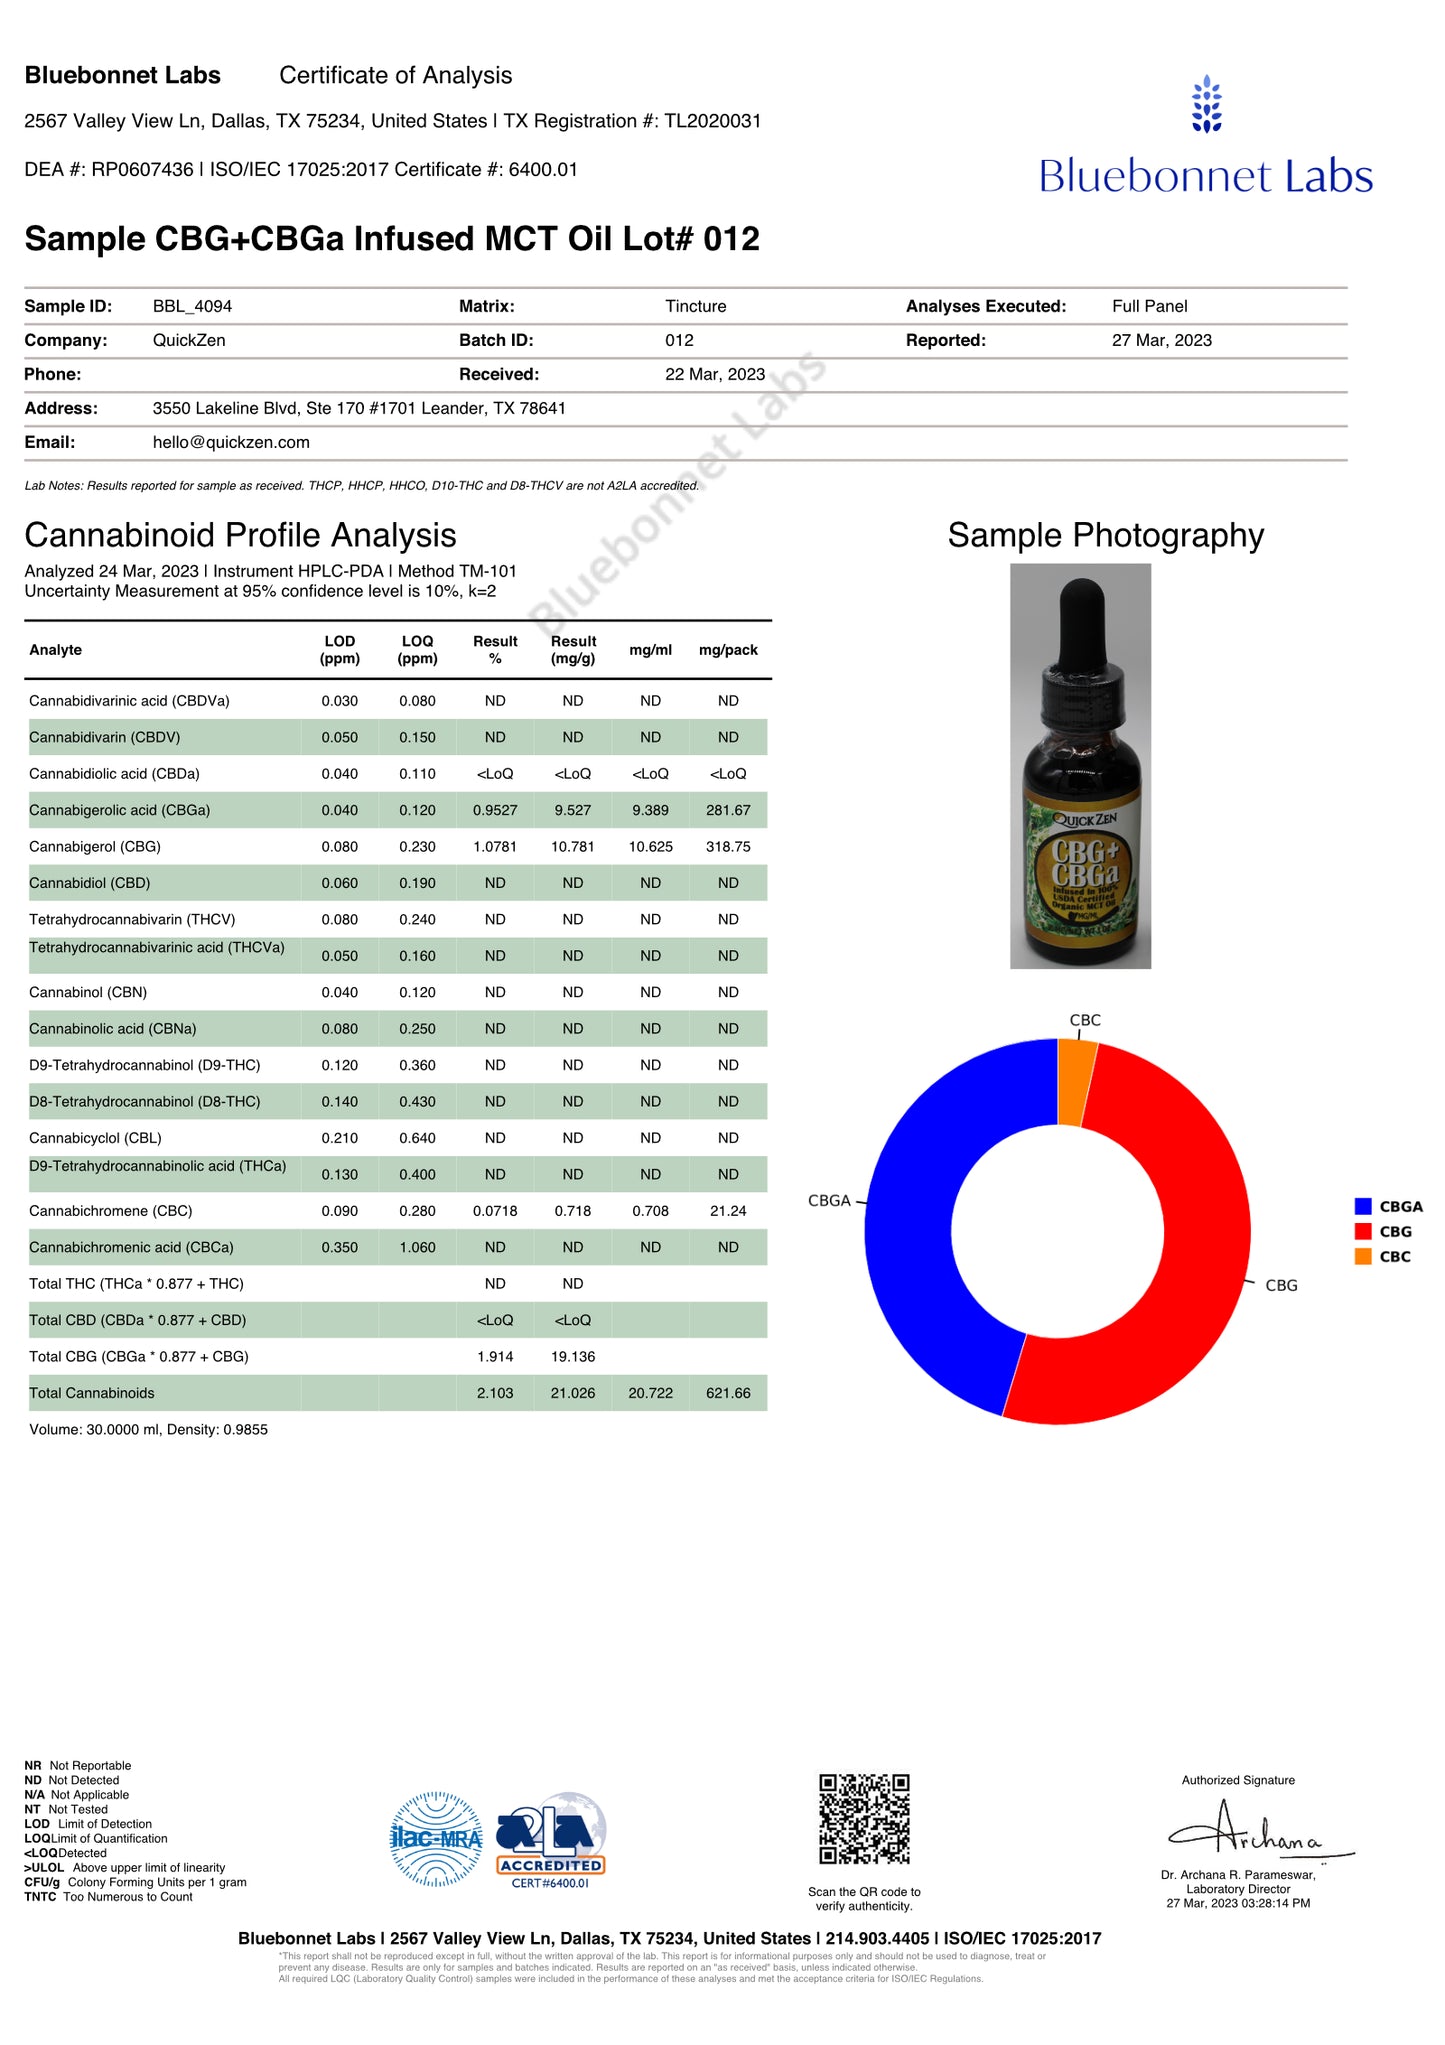 Lot 012 page one, cannabinoids profile analysis. Blue Bonnet Laboratories Certified Full Panel Tests.